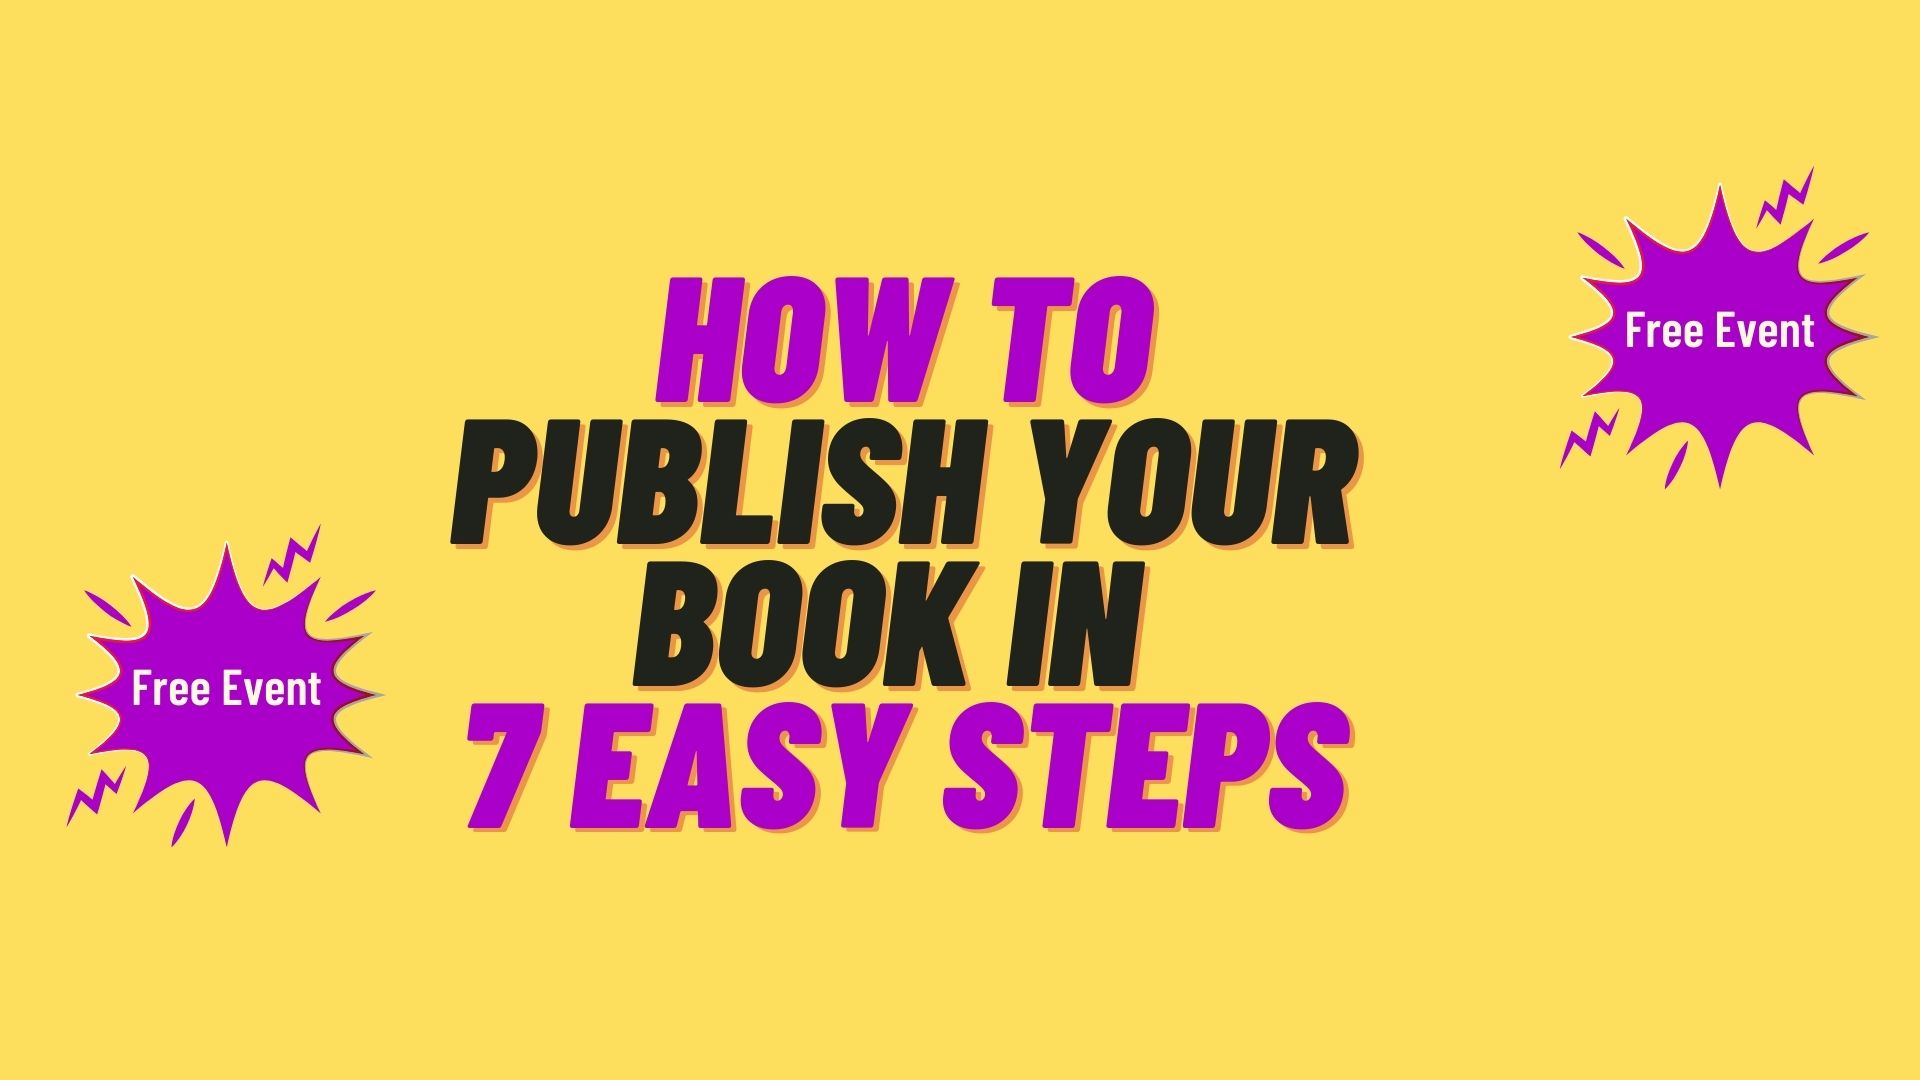 free courses for authors, free training for authors. how to get found on amazon, how to get your book ranked on amazon, boost your book visibility on amazon